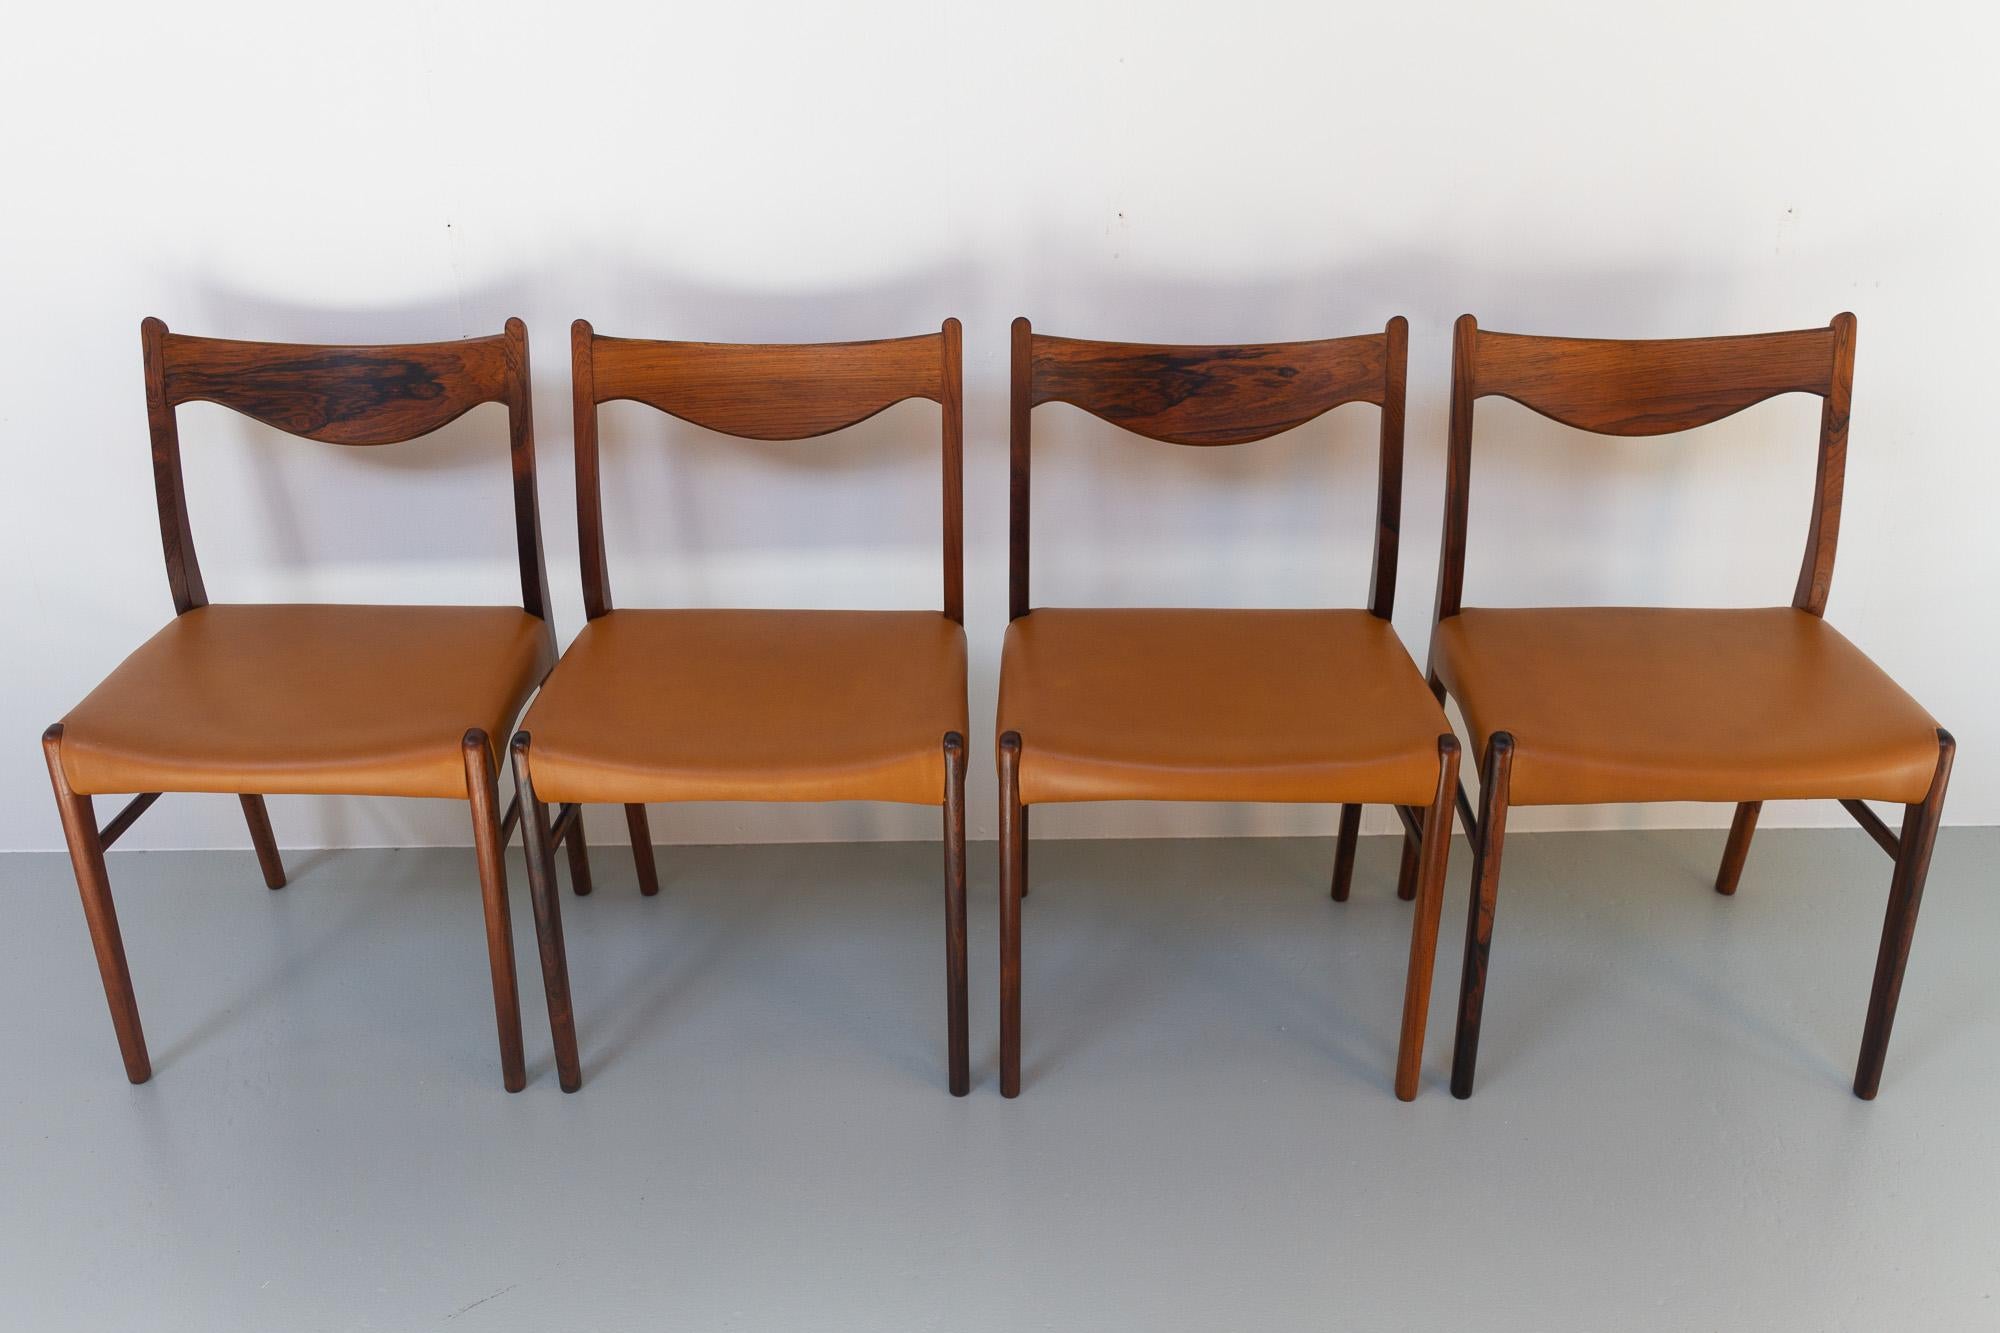 Leather Danish Modern Rosewood Dining Room Chairs GS61 by Arne Wahl Iversen, 1950s